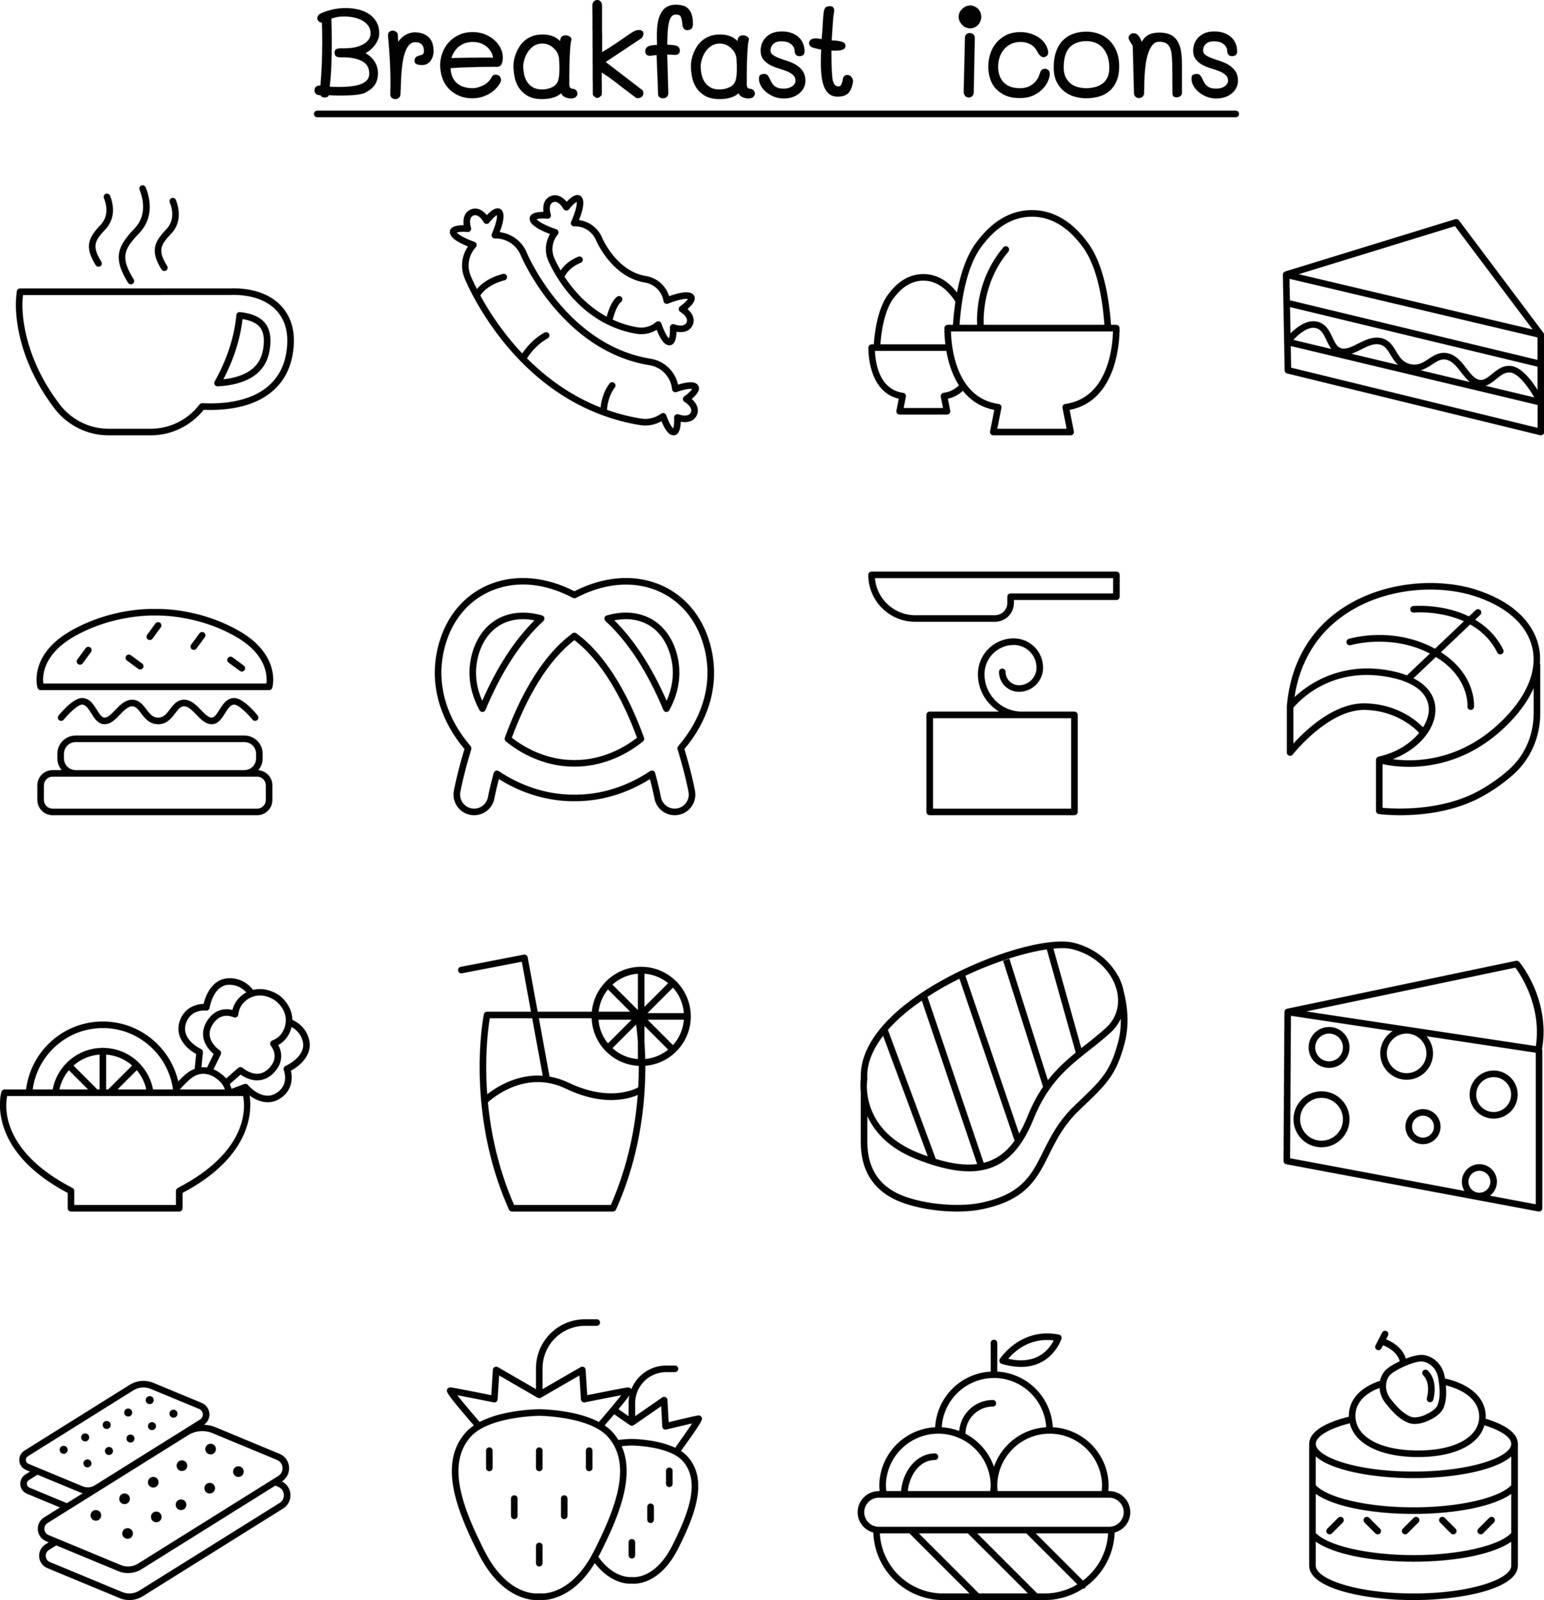 Breakfast icon set in thin line style by Puckung